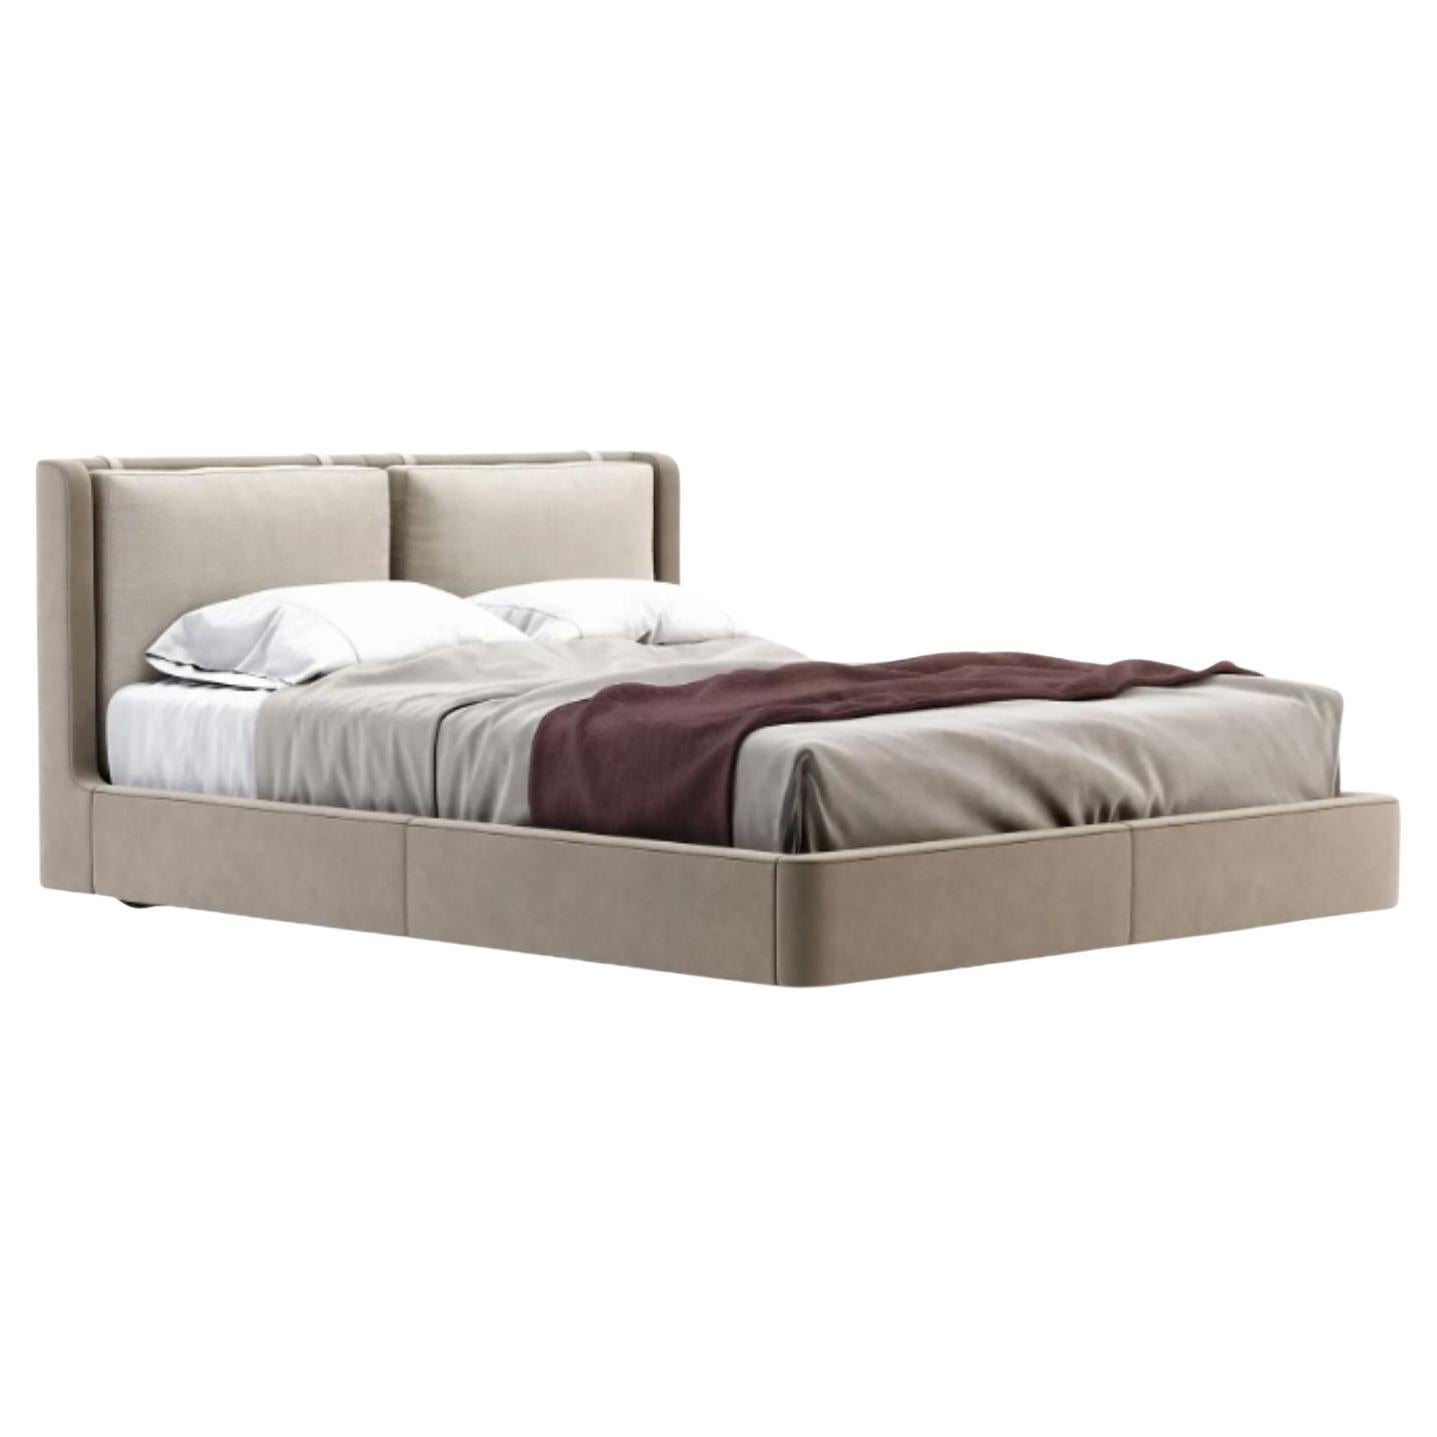 Queen Size Kelsi Bed by Domkapa For Sale